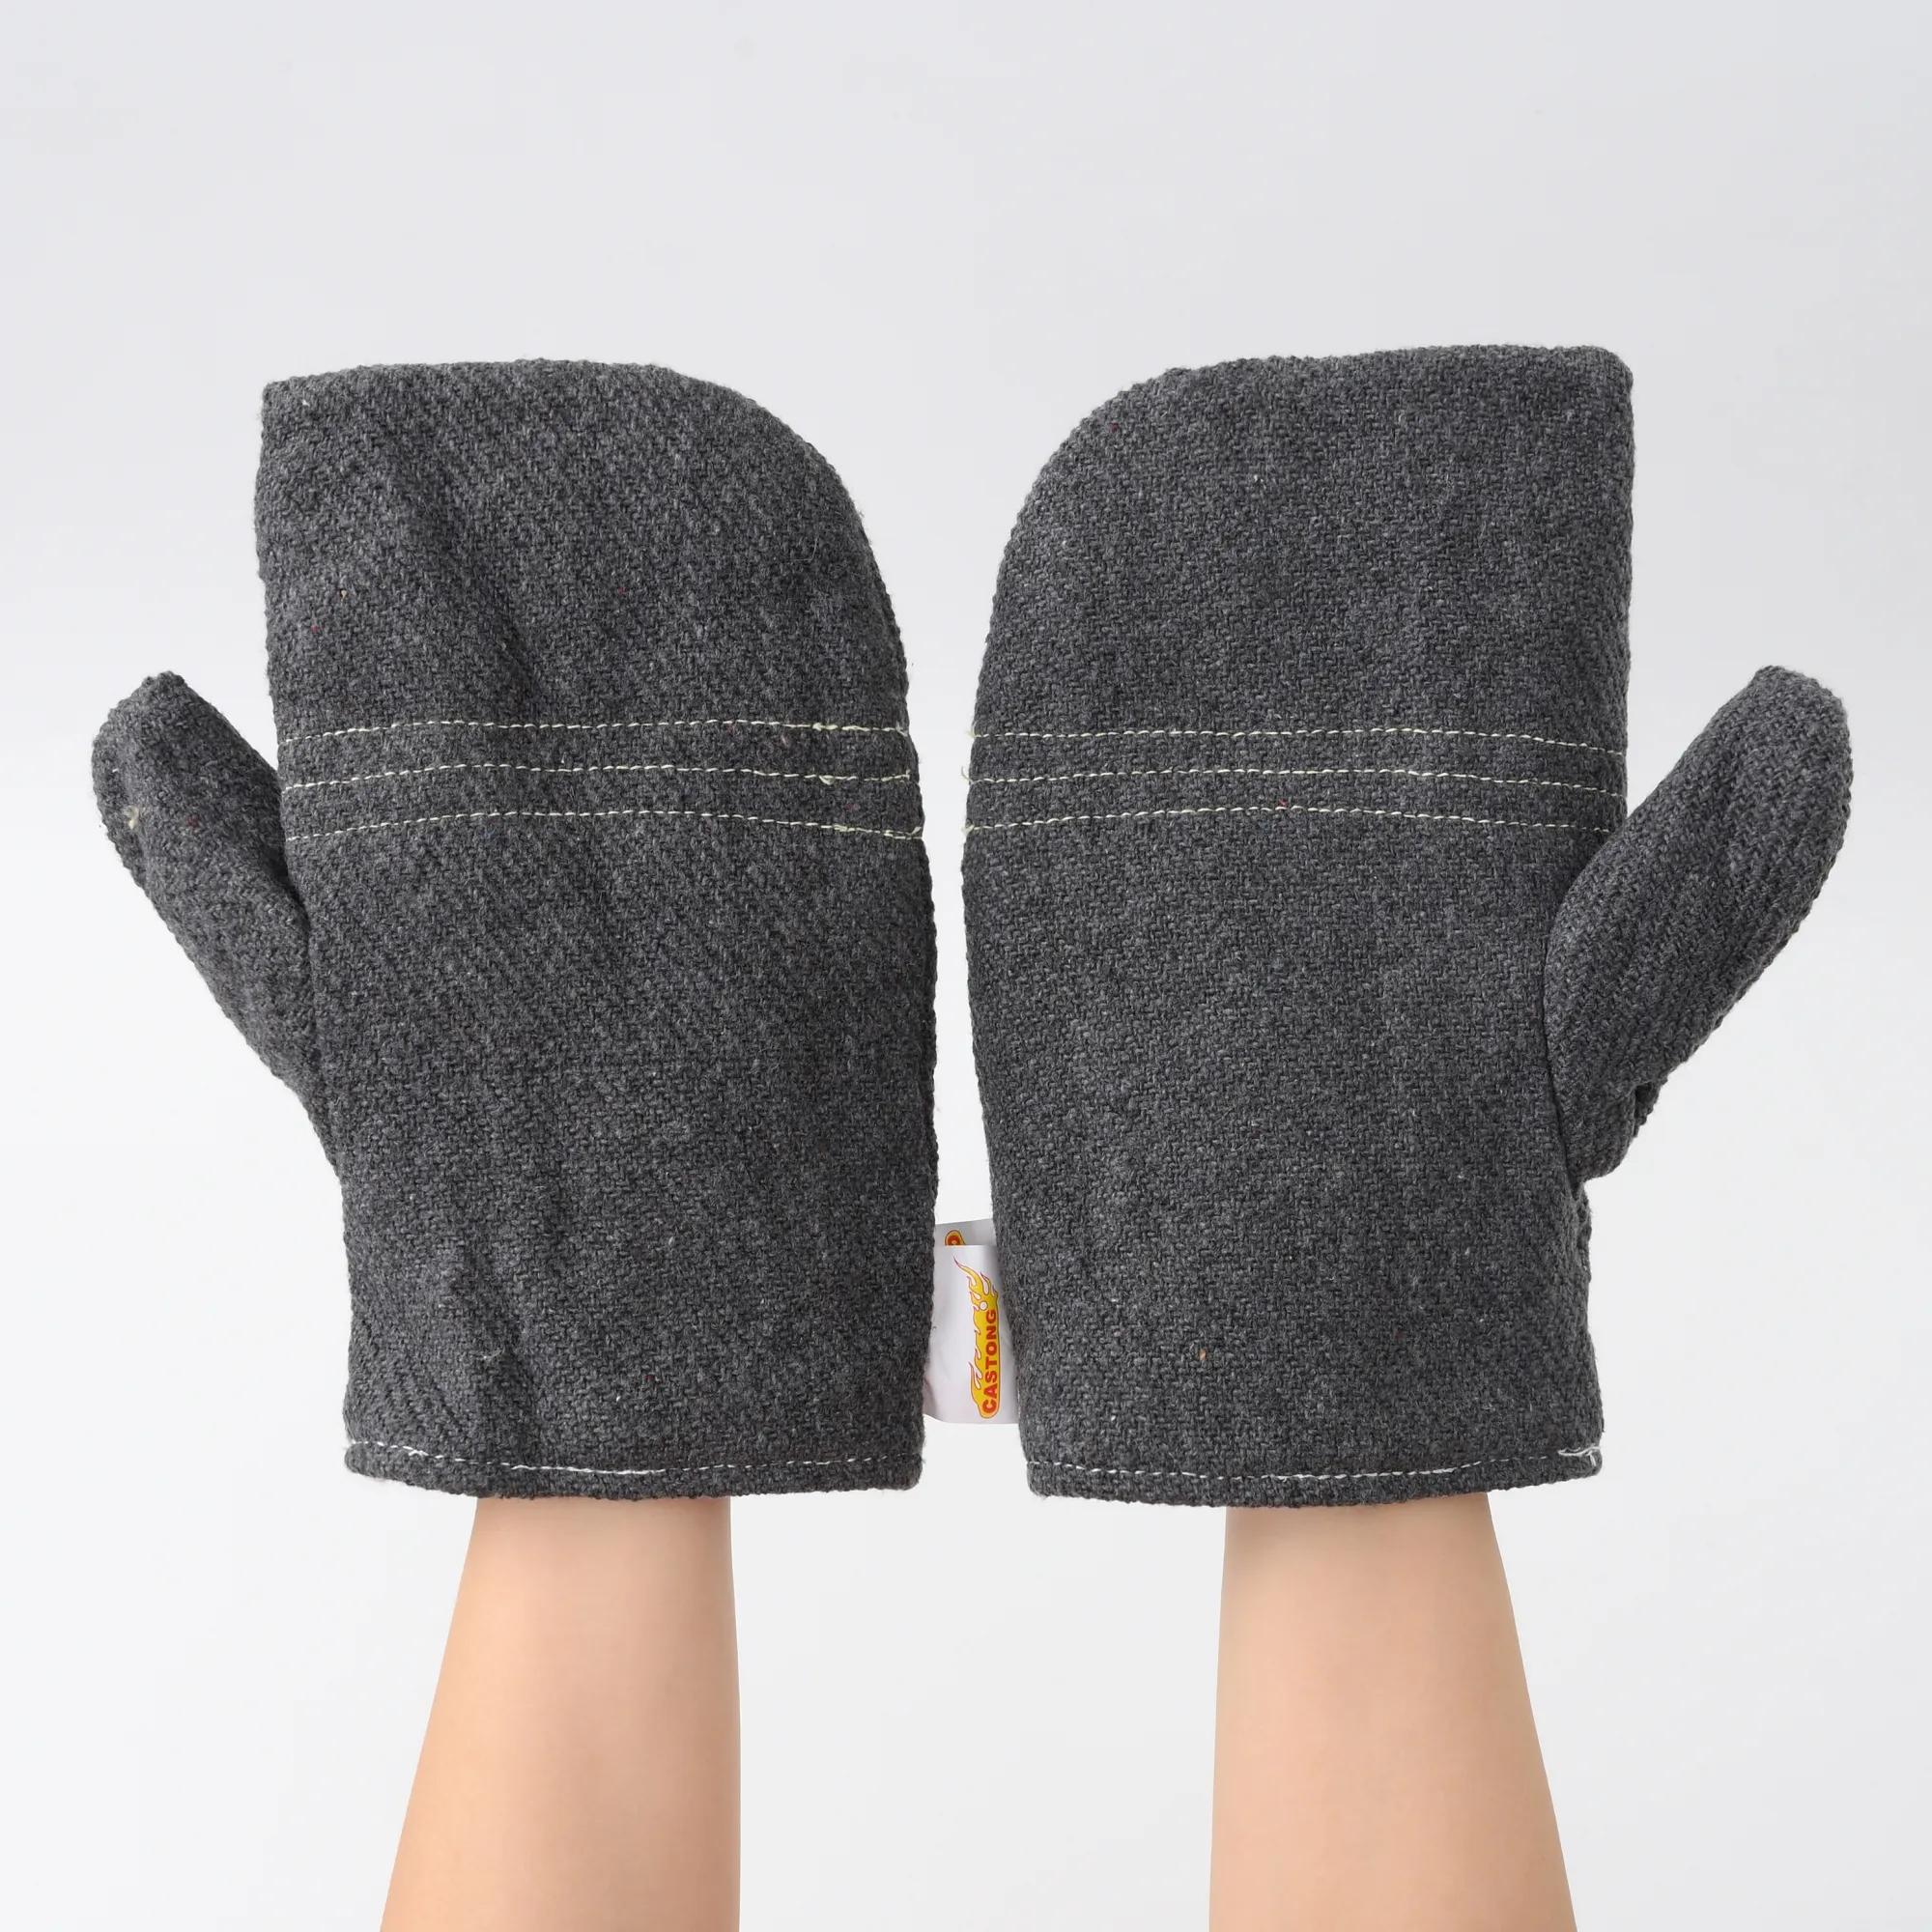 Stock CASTONG New Developed Double Layers Dark Gery Polyester Twill Mitten Industrial Welding Gloves for Construction